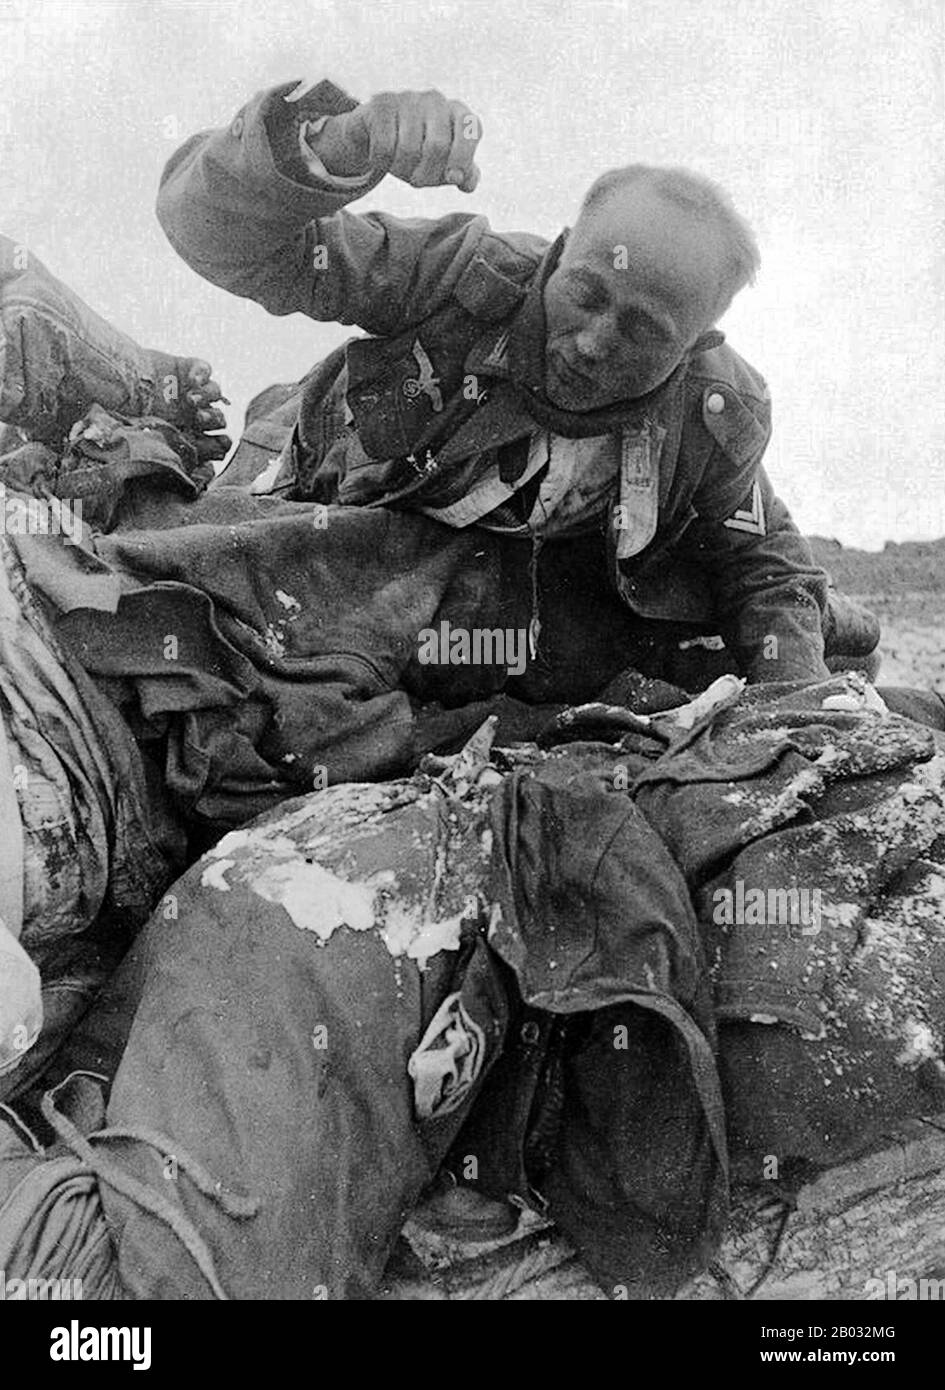 The Battle Of Stalingrad 23 August 1942 2 February 1943 Was A Major